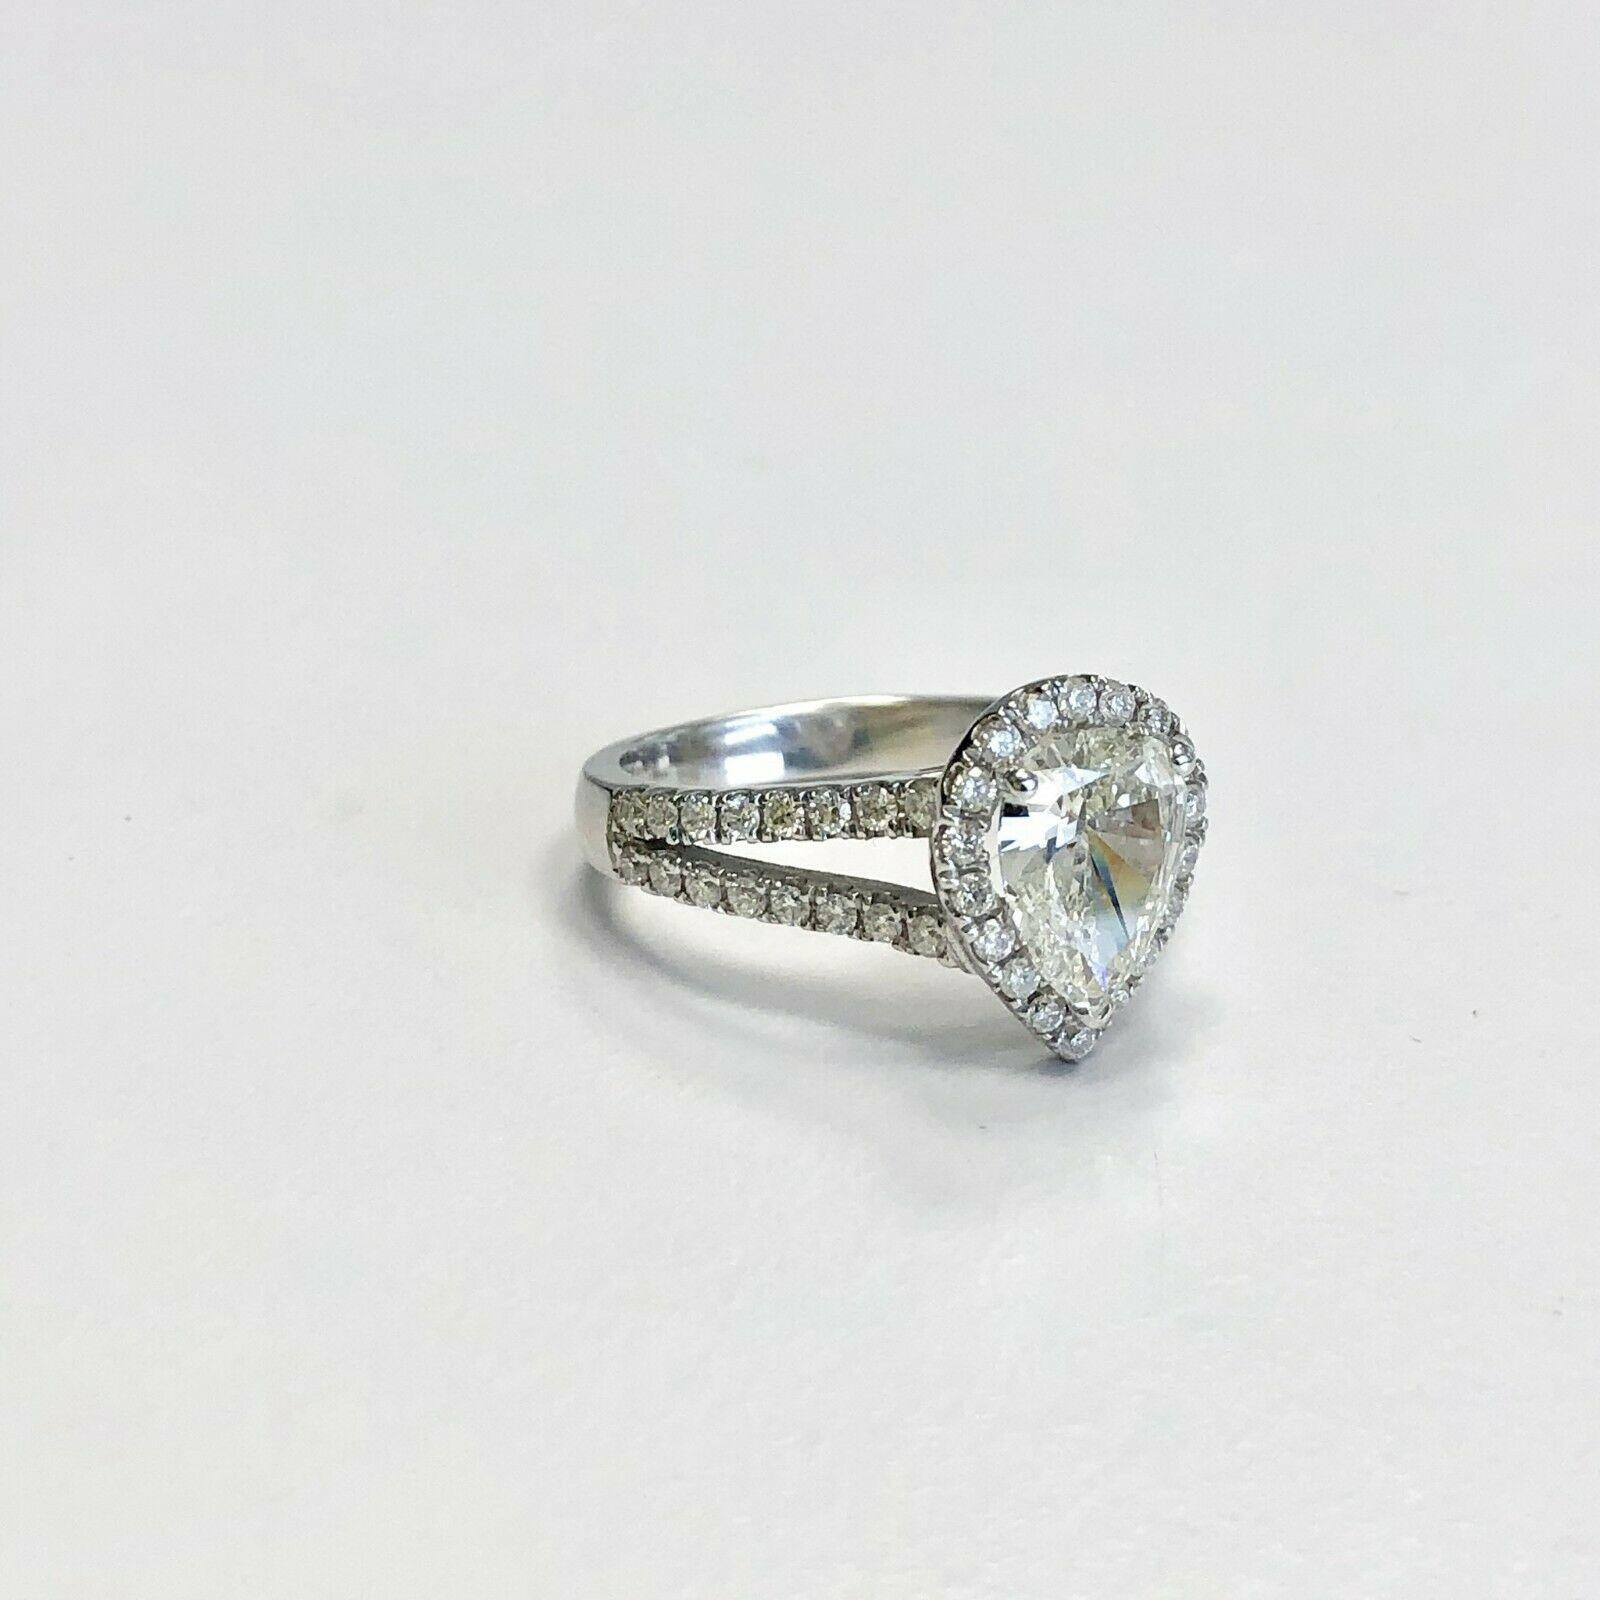  This is a beautiful 14k white gold diamond ring Split Shank with Pear Shape center stone of 1.19ct J color and clarity of VVS2 graded by GIA has a 40pcs small side stones with estimated weight of .55ct H color and clarity of VS1. The current ring